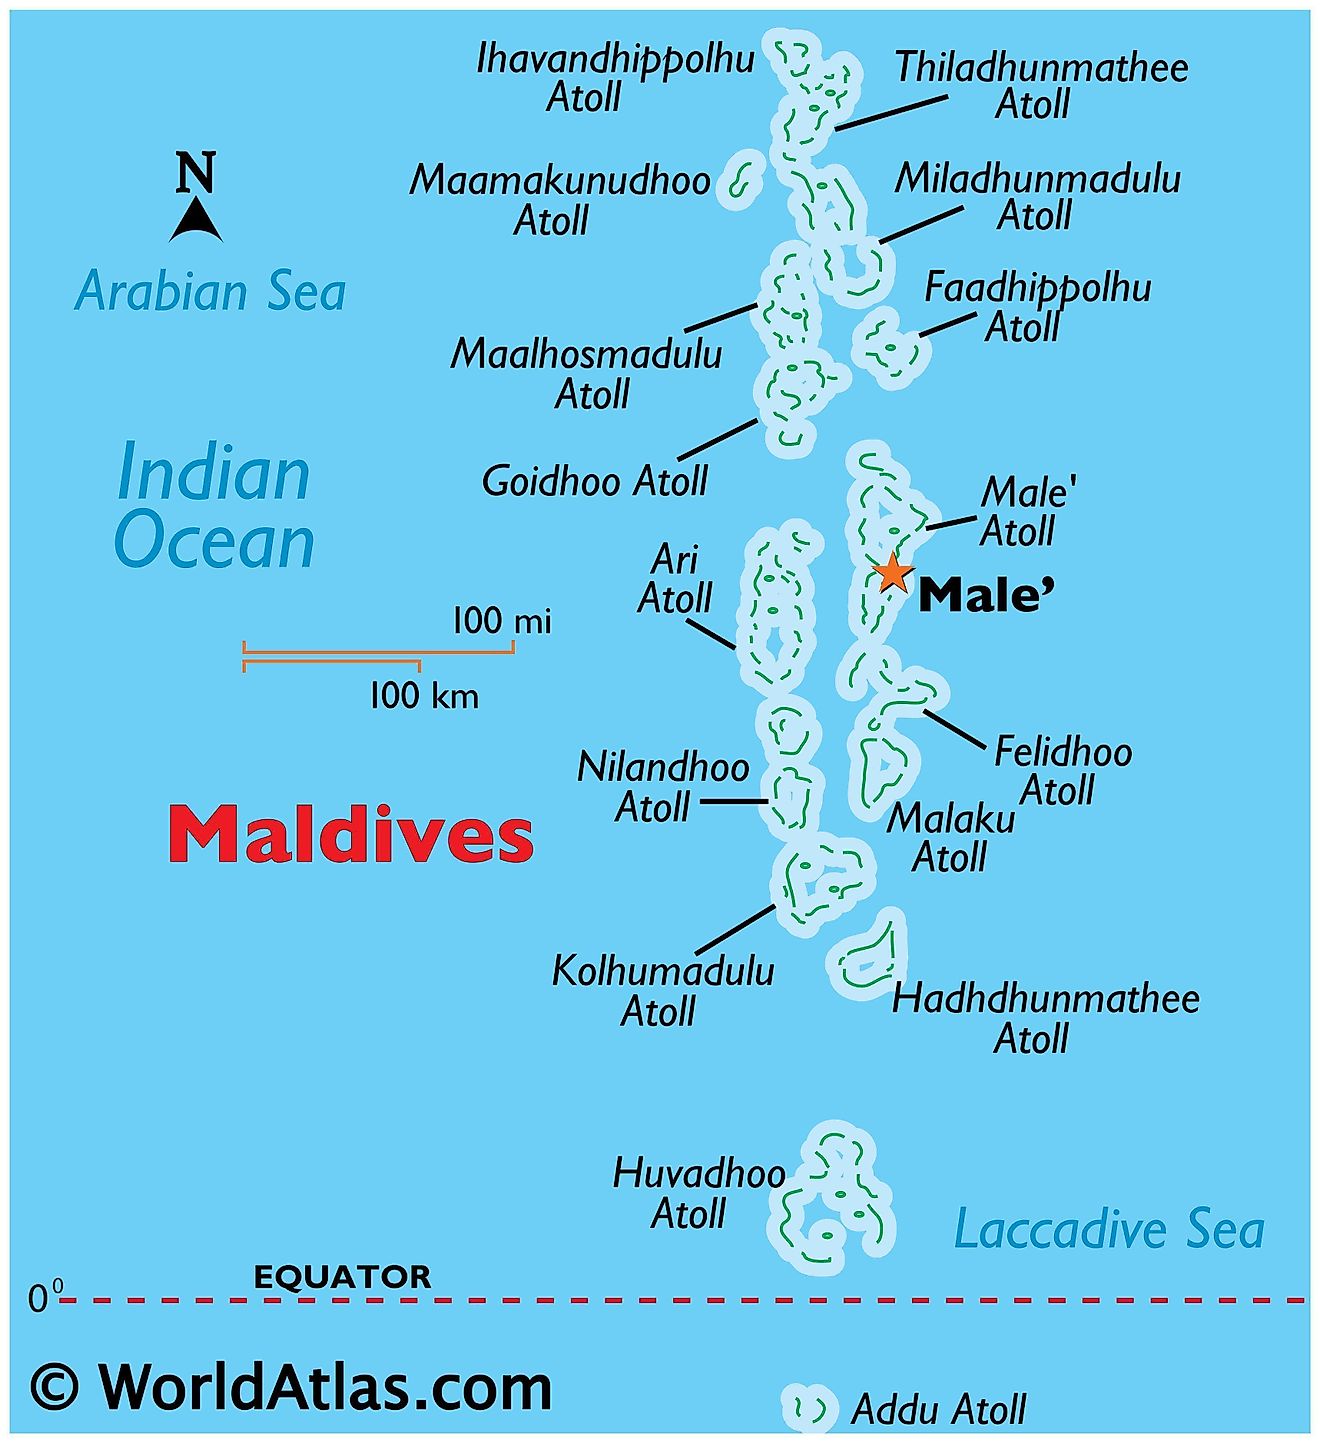 Importance of Maldives for Tourism and Ecology